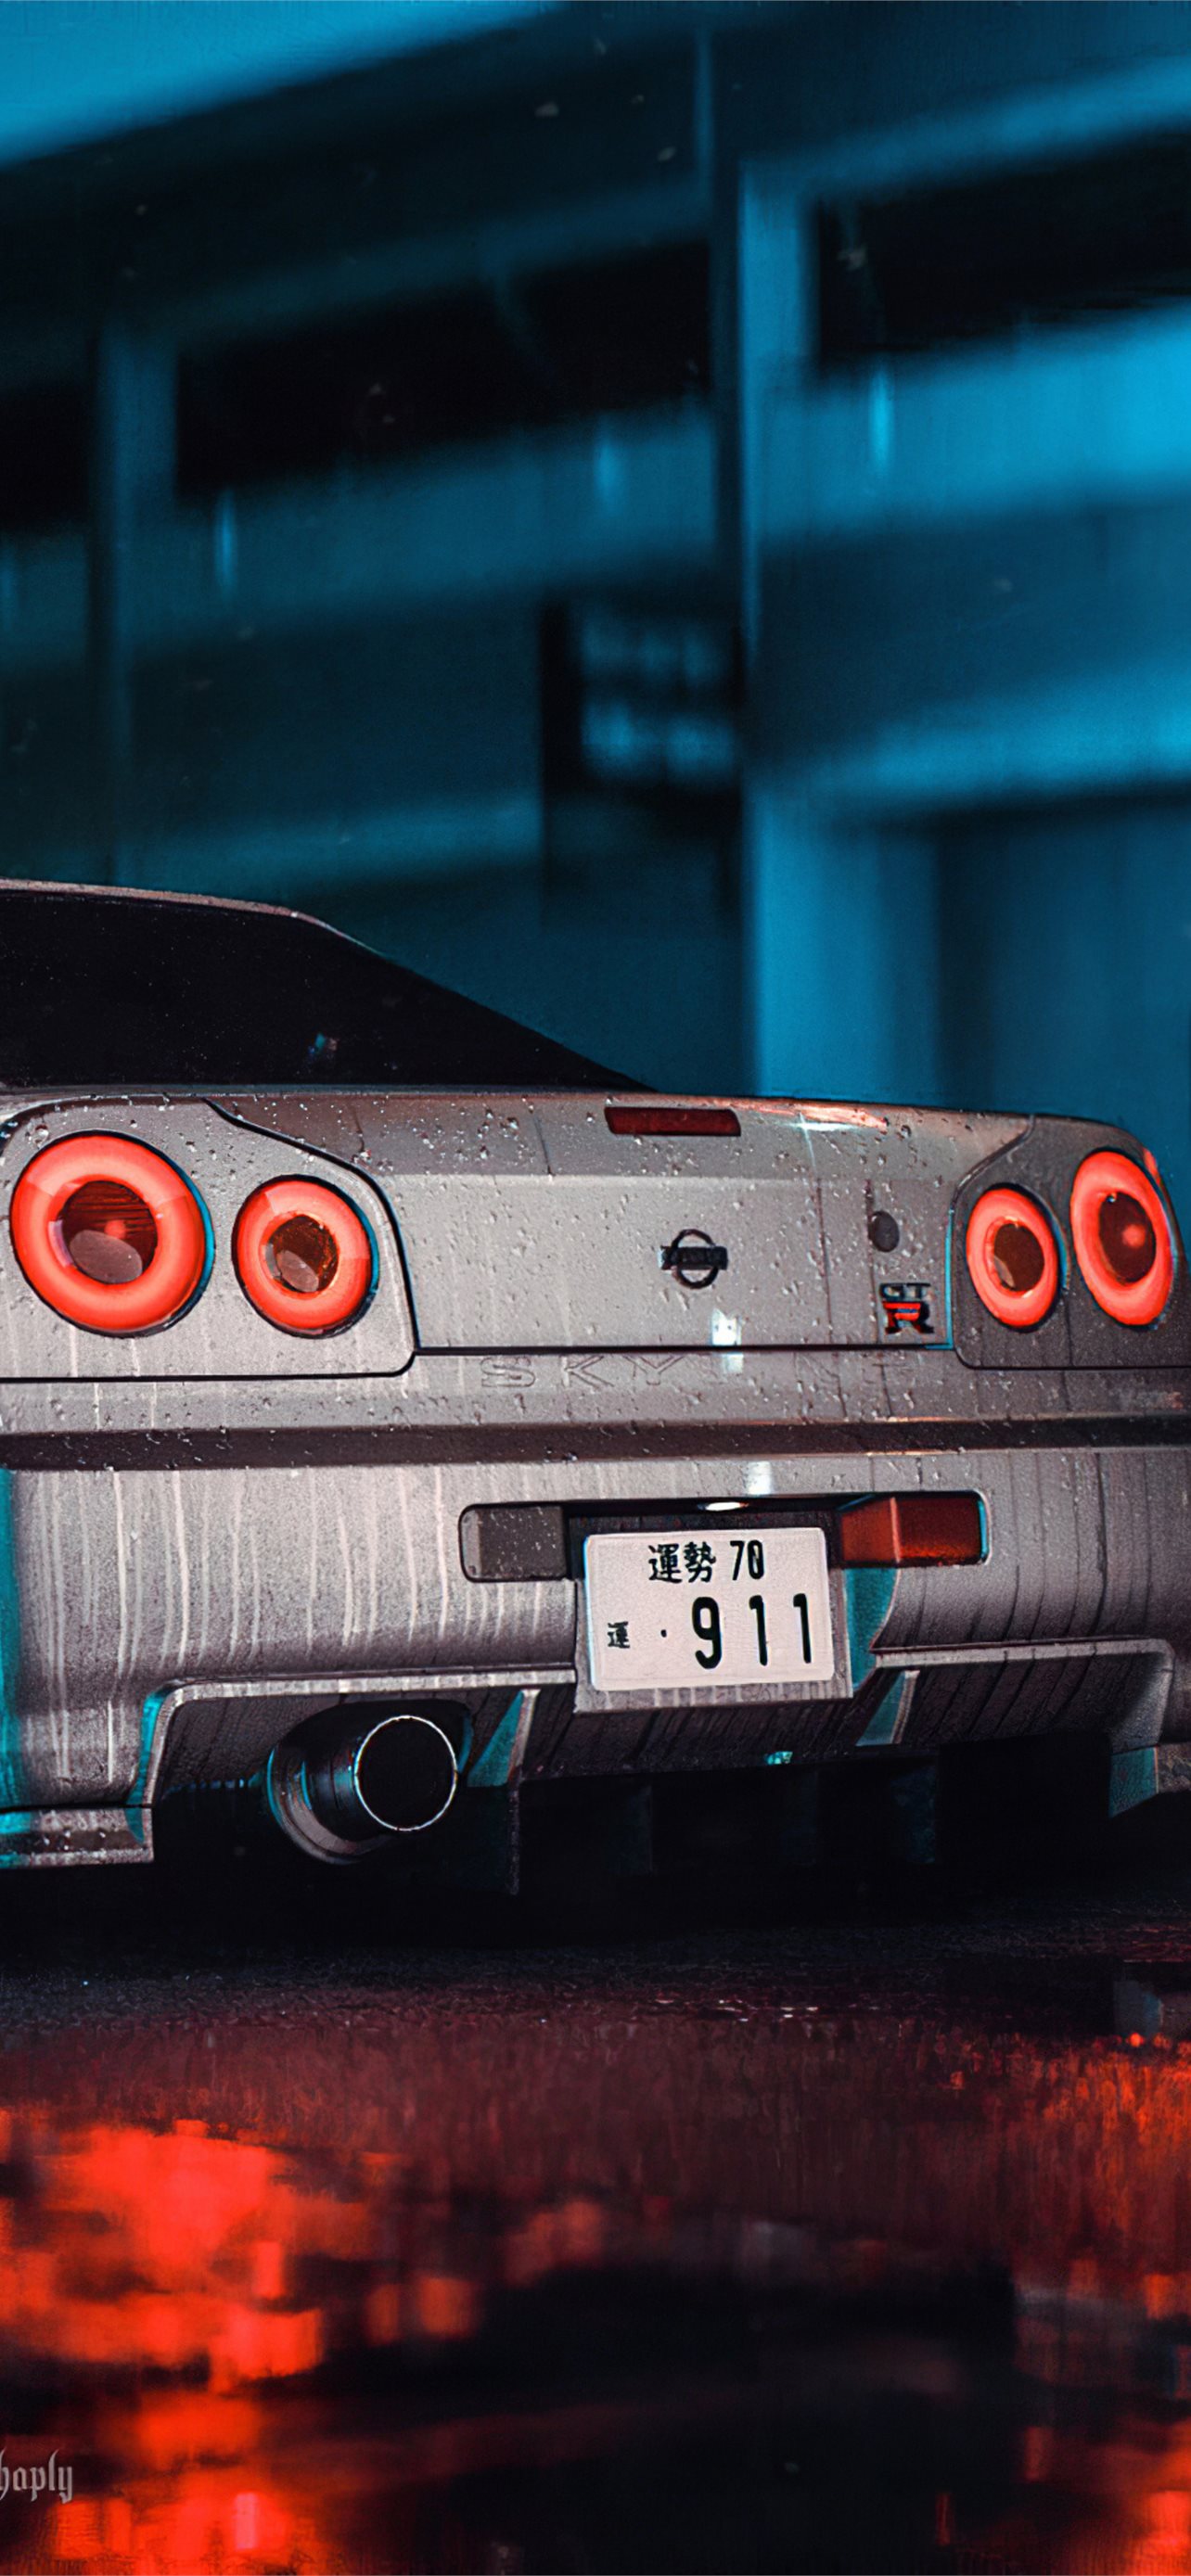 Nissan Skyline Gt R R34 Need For Speed 4k Samsung Iphone Wallpapers Free Download